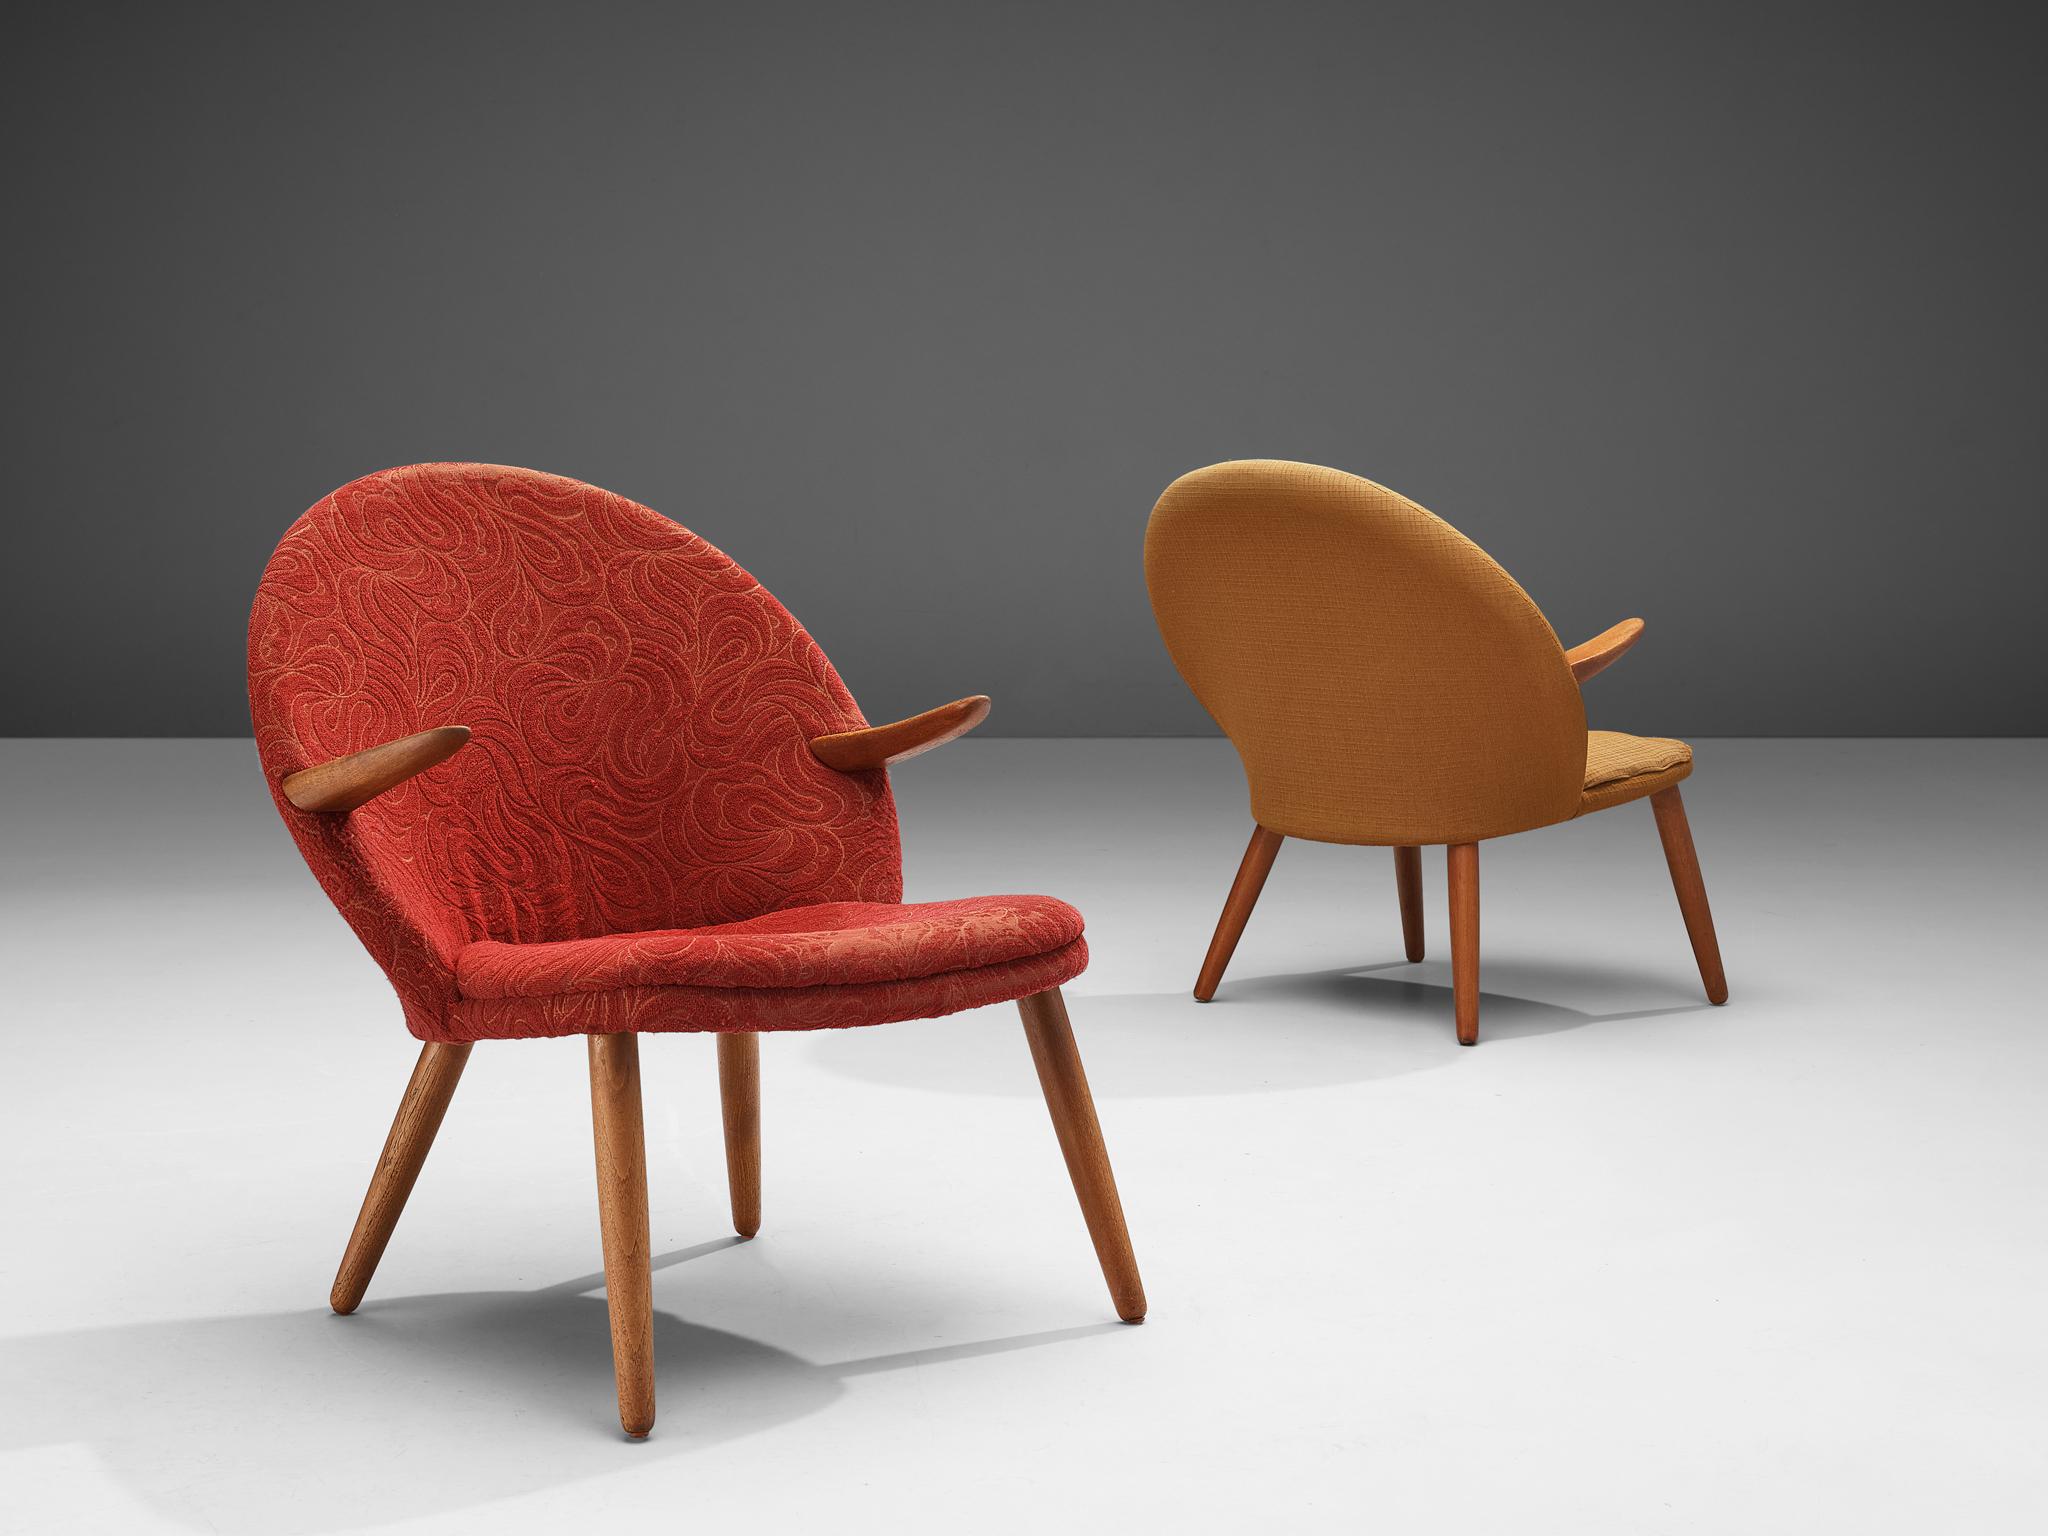 Svend Aage Eriksen, pair of ‘penguin’ easy chairs, teak, fabric, Denmark, circa. 1960

Stunning pair of Danish lounge chairs designed by Svend Aage Eriksen. The chairs have a sculptural quality and light feeling. This is especially created by the